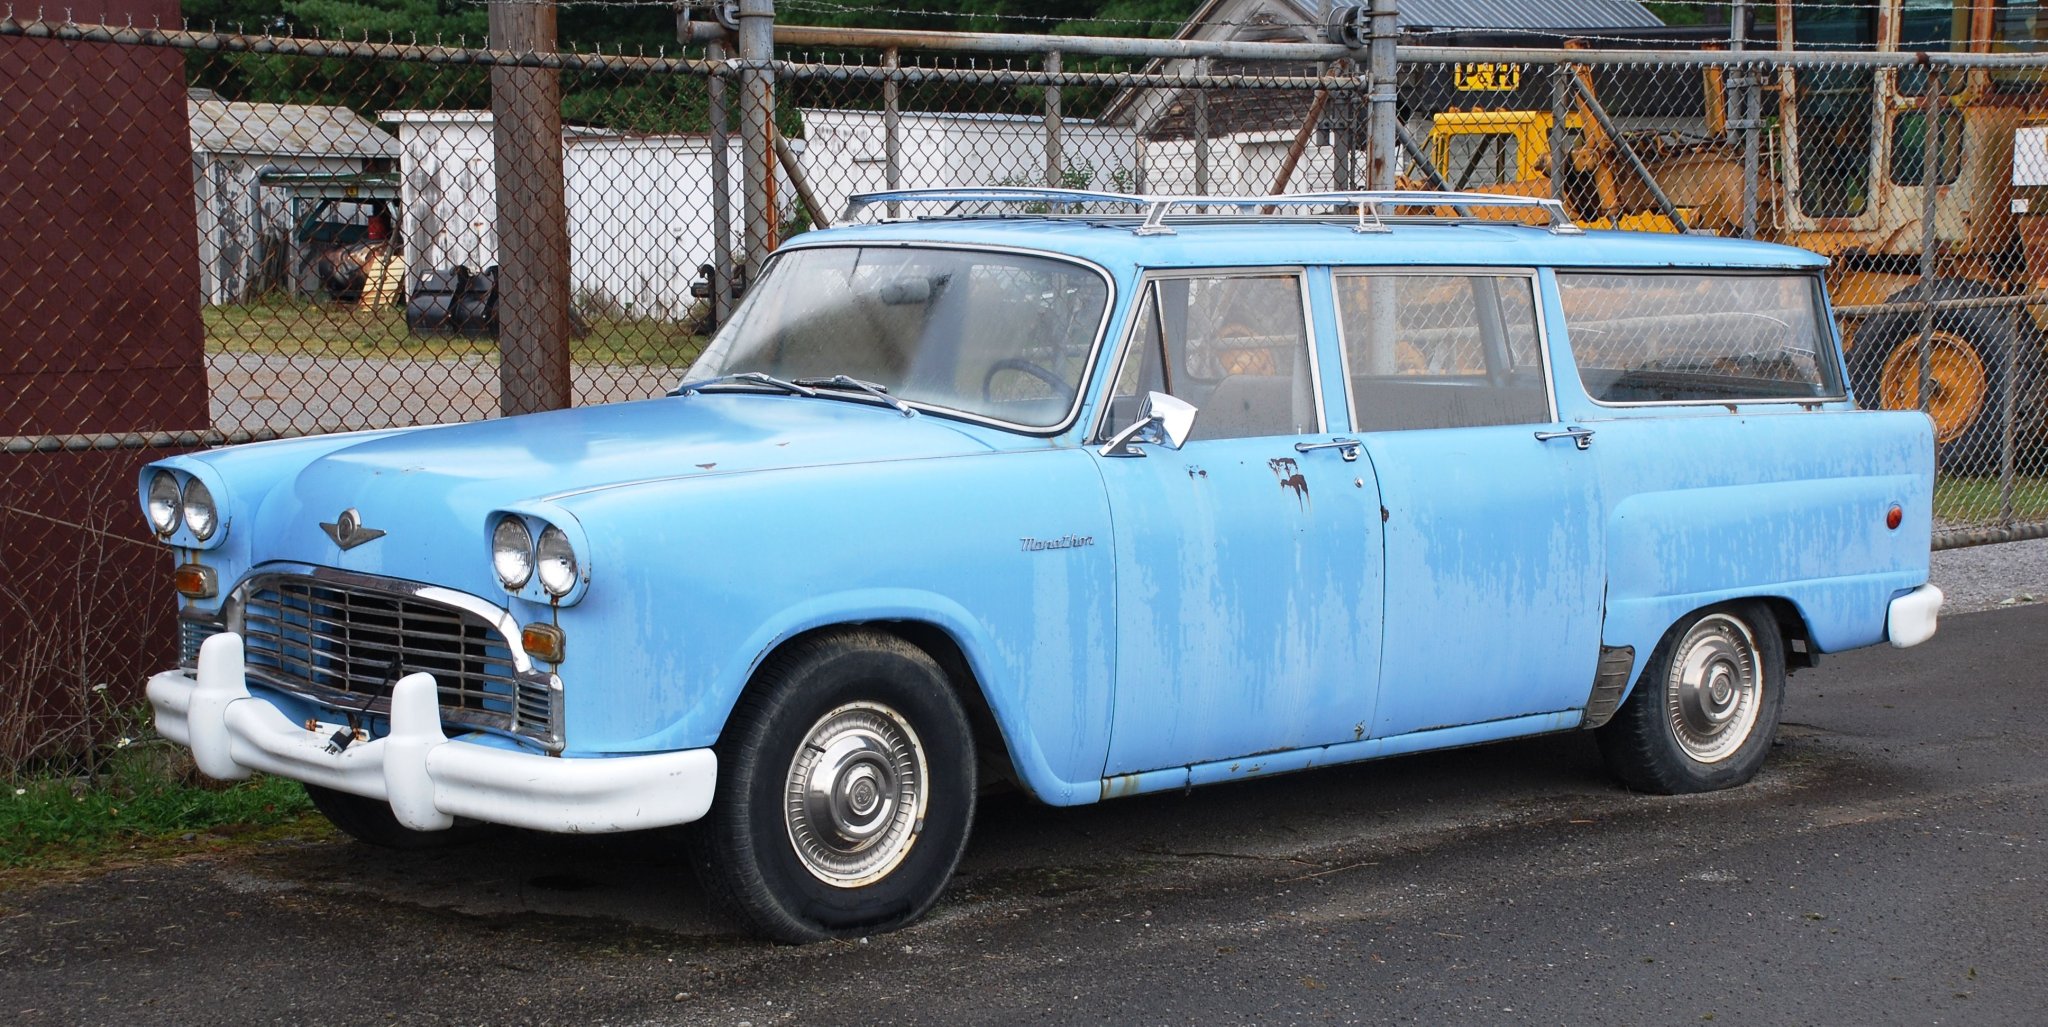 Ranking The Ugliest American Cars Of The '60s